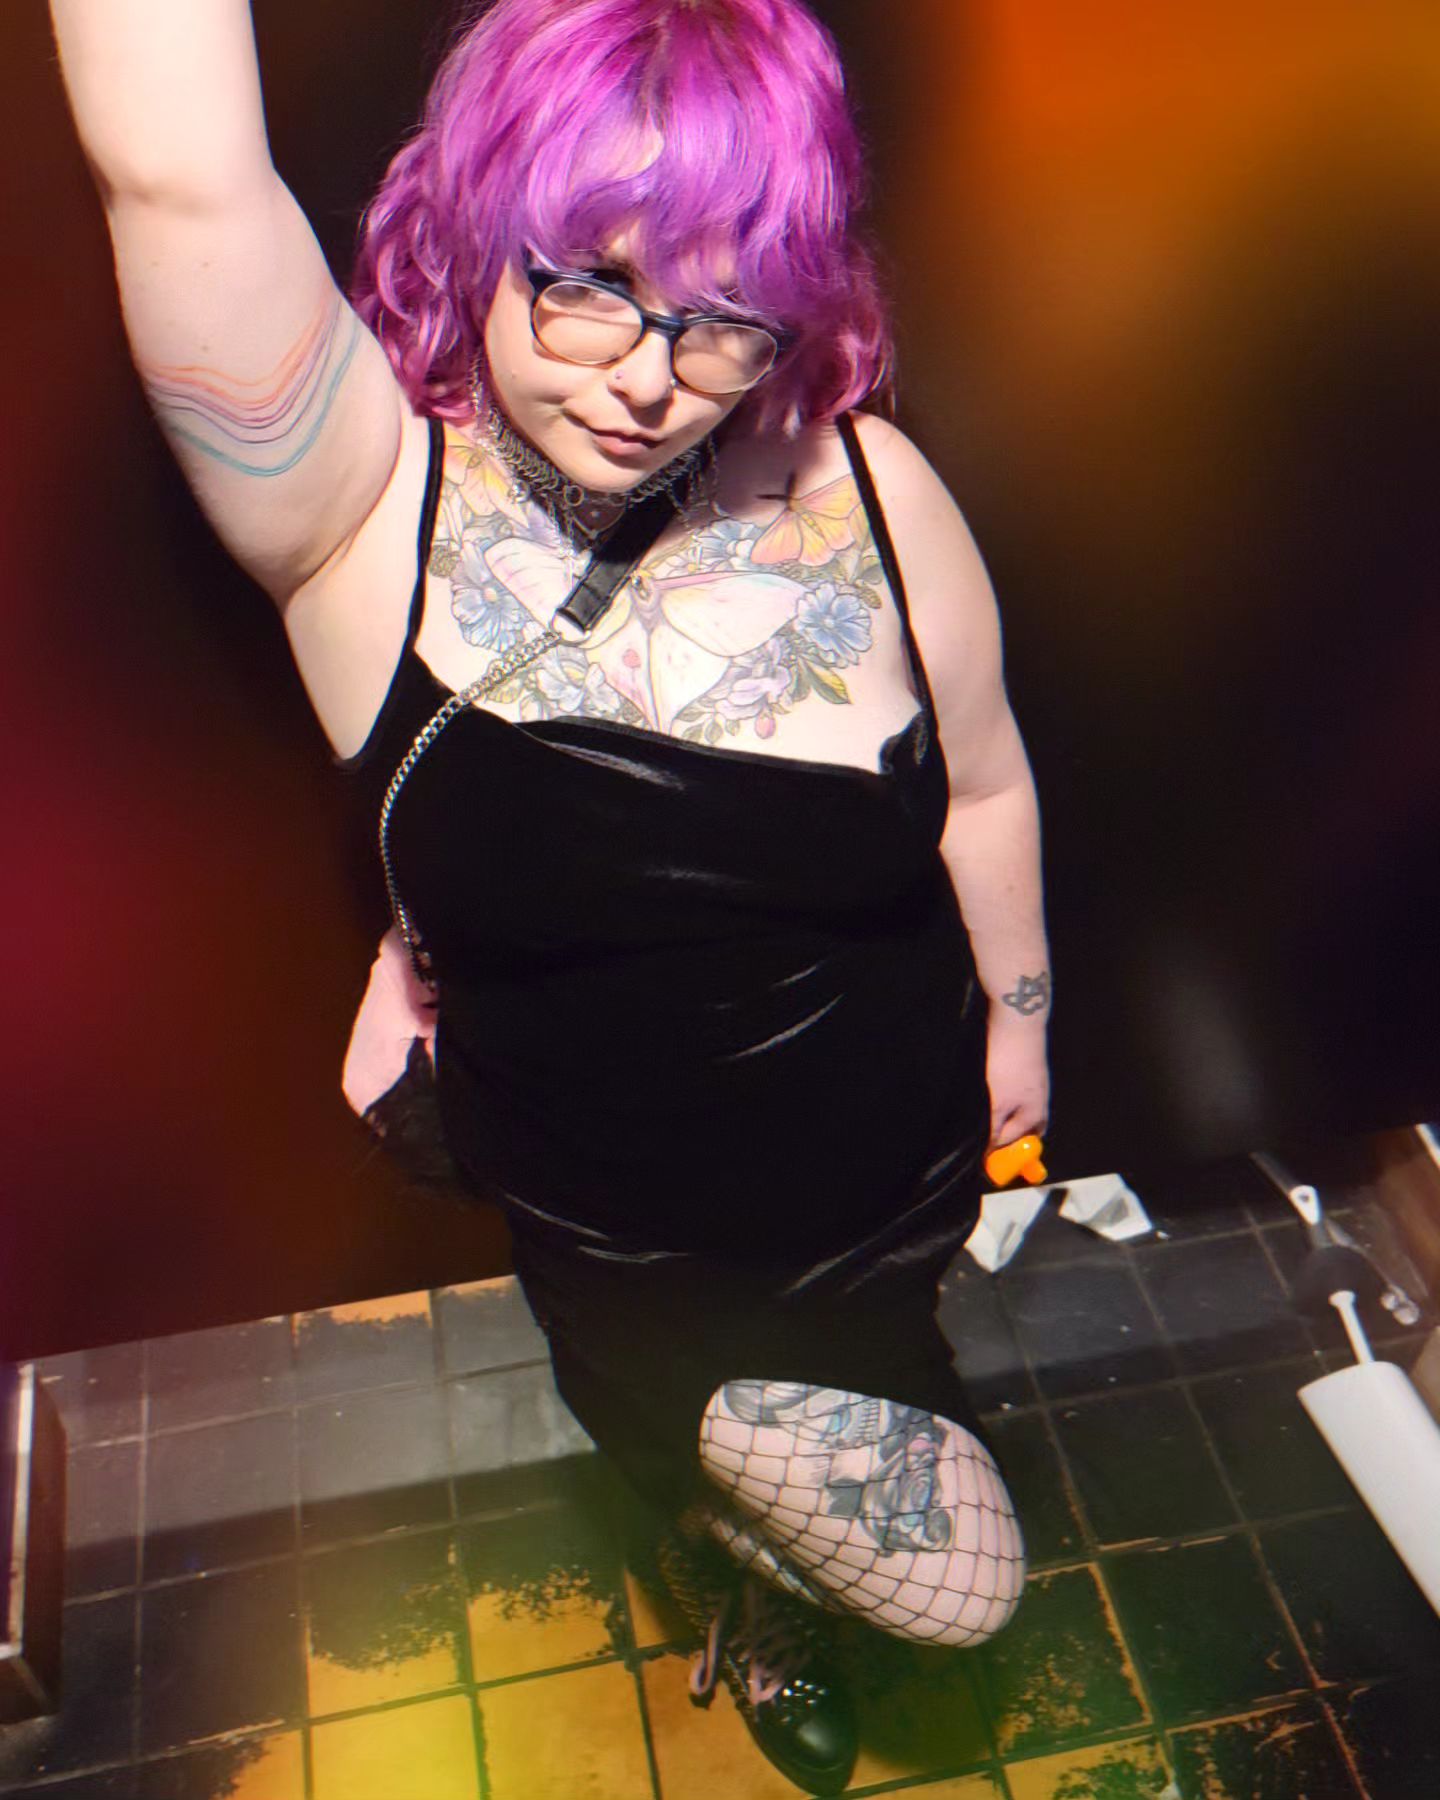 Happy new year from ya favorite lil gremlin 🩷💜 
Tbh it's been quite a year, but I'm so excited for the growth I've made and the growth to come. 
♡
♡
♡
♡
♡
♡
#piercings #coloredhair #pastelgoth #goth #tattoos #thickgirl #thightattoo #rainbowgoth #ethot #queer #Altgirl #Altgirl #fishnet #fullbody #barbathrooms #girlsnight #girlswithglasses #kawaii #mullet #newyear